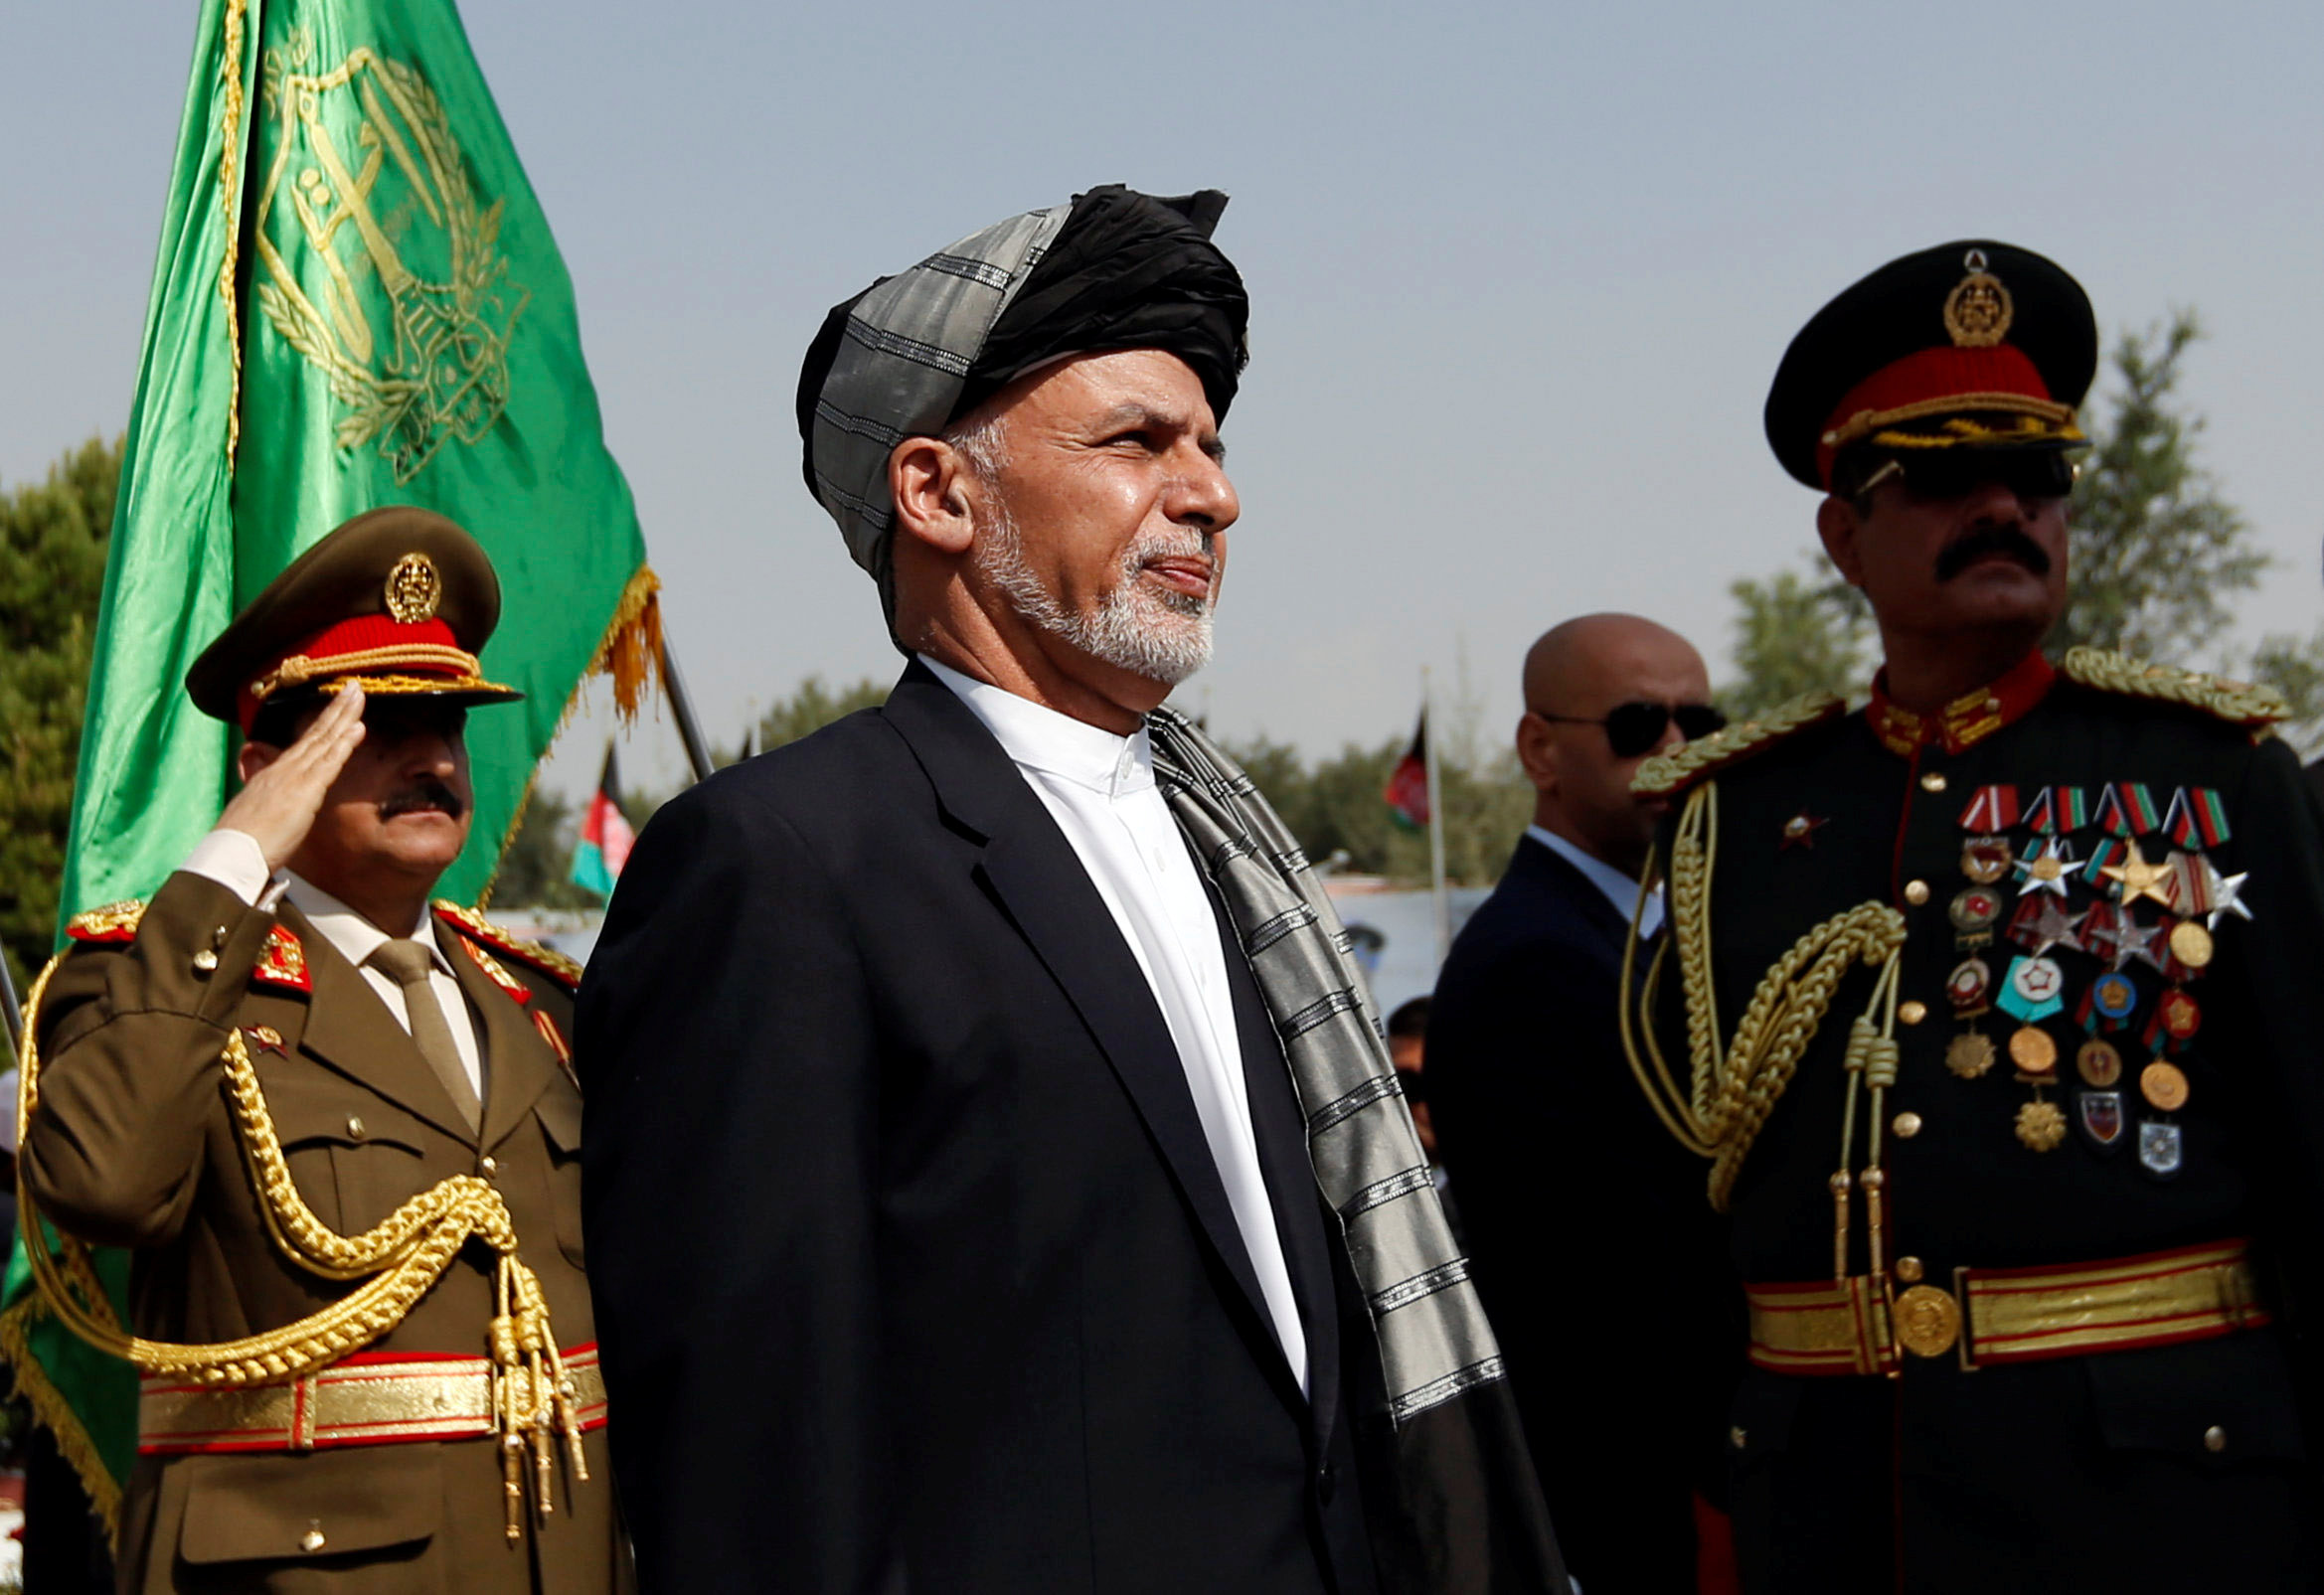 In pictures: Afghanistan Independence Day celebrations